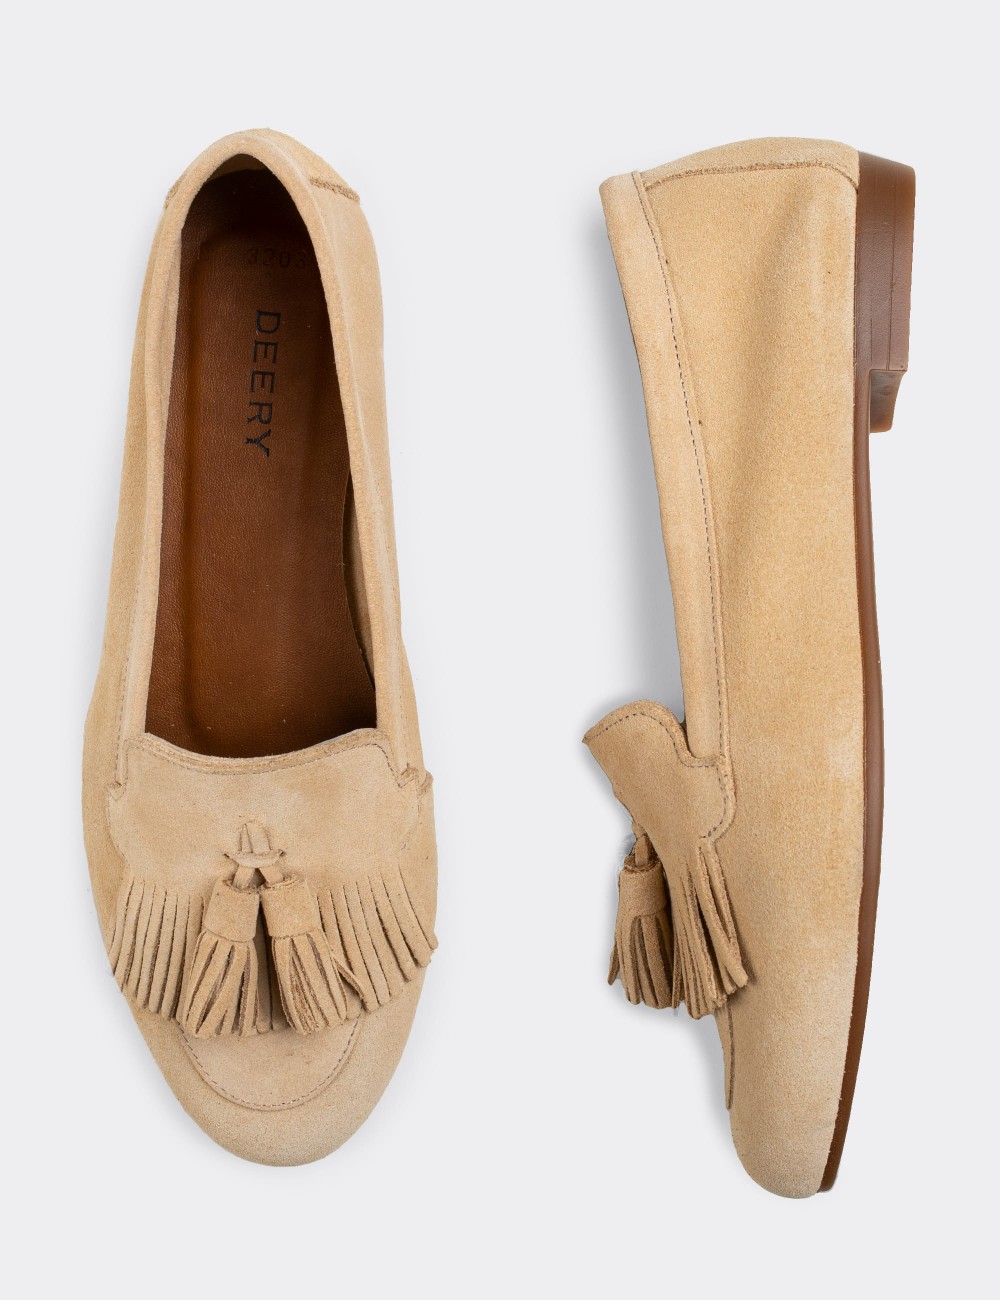 Beige Suede Leather Loafers - E3203ZBEJC01